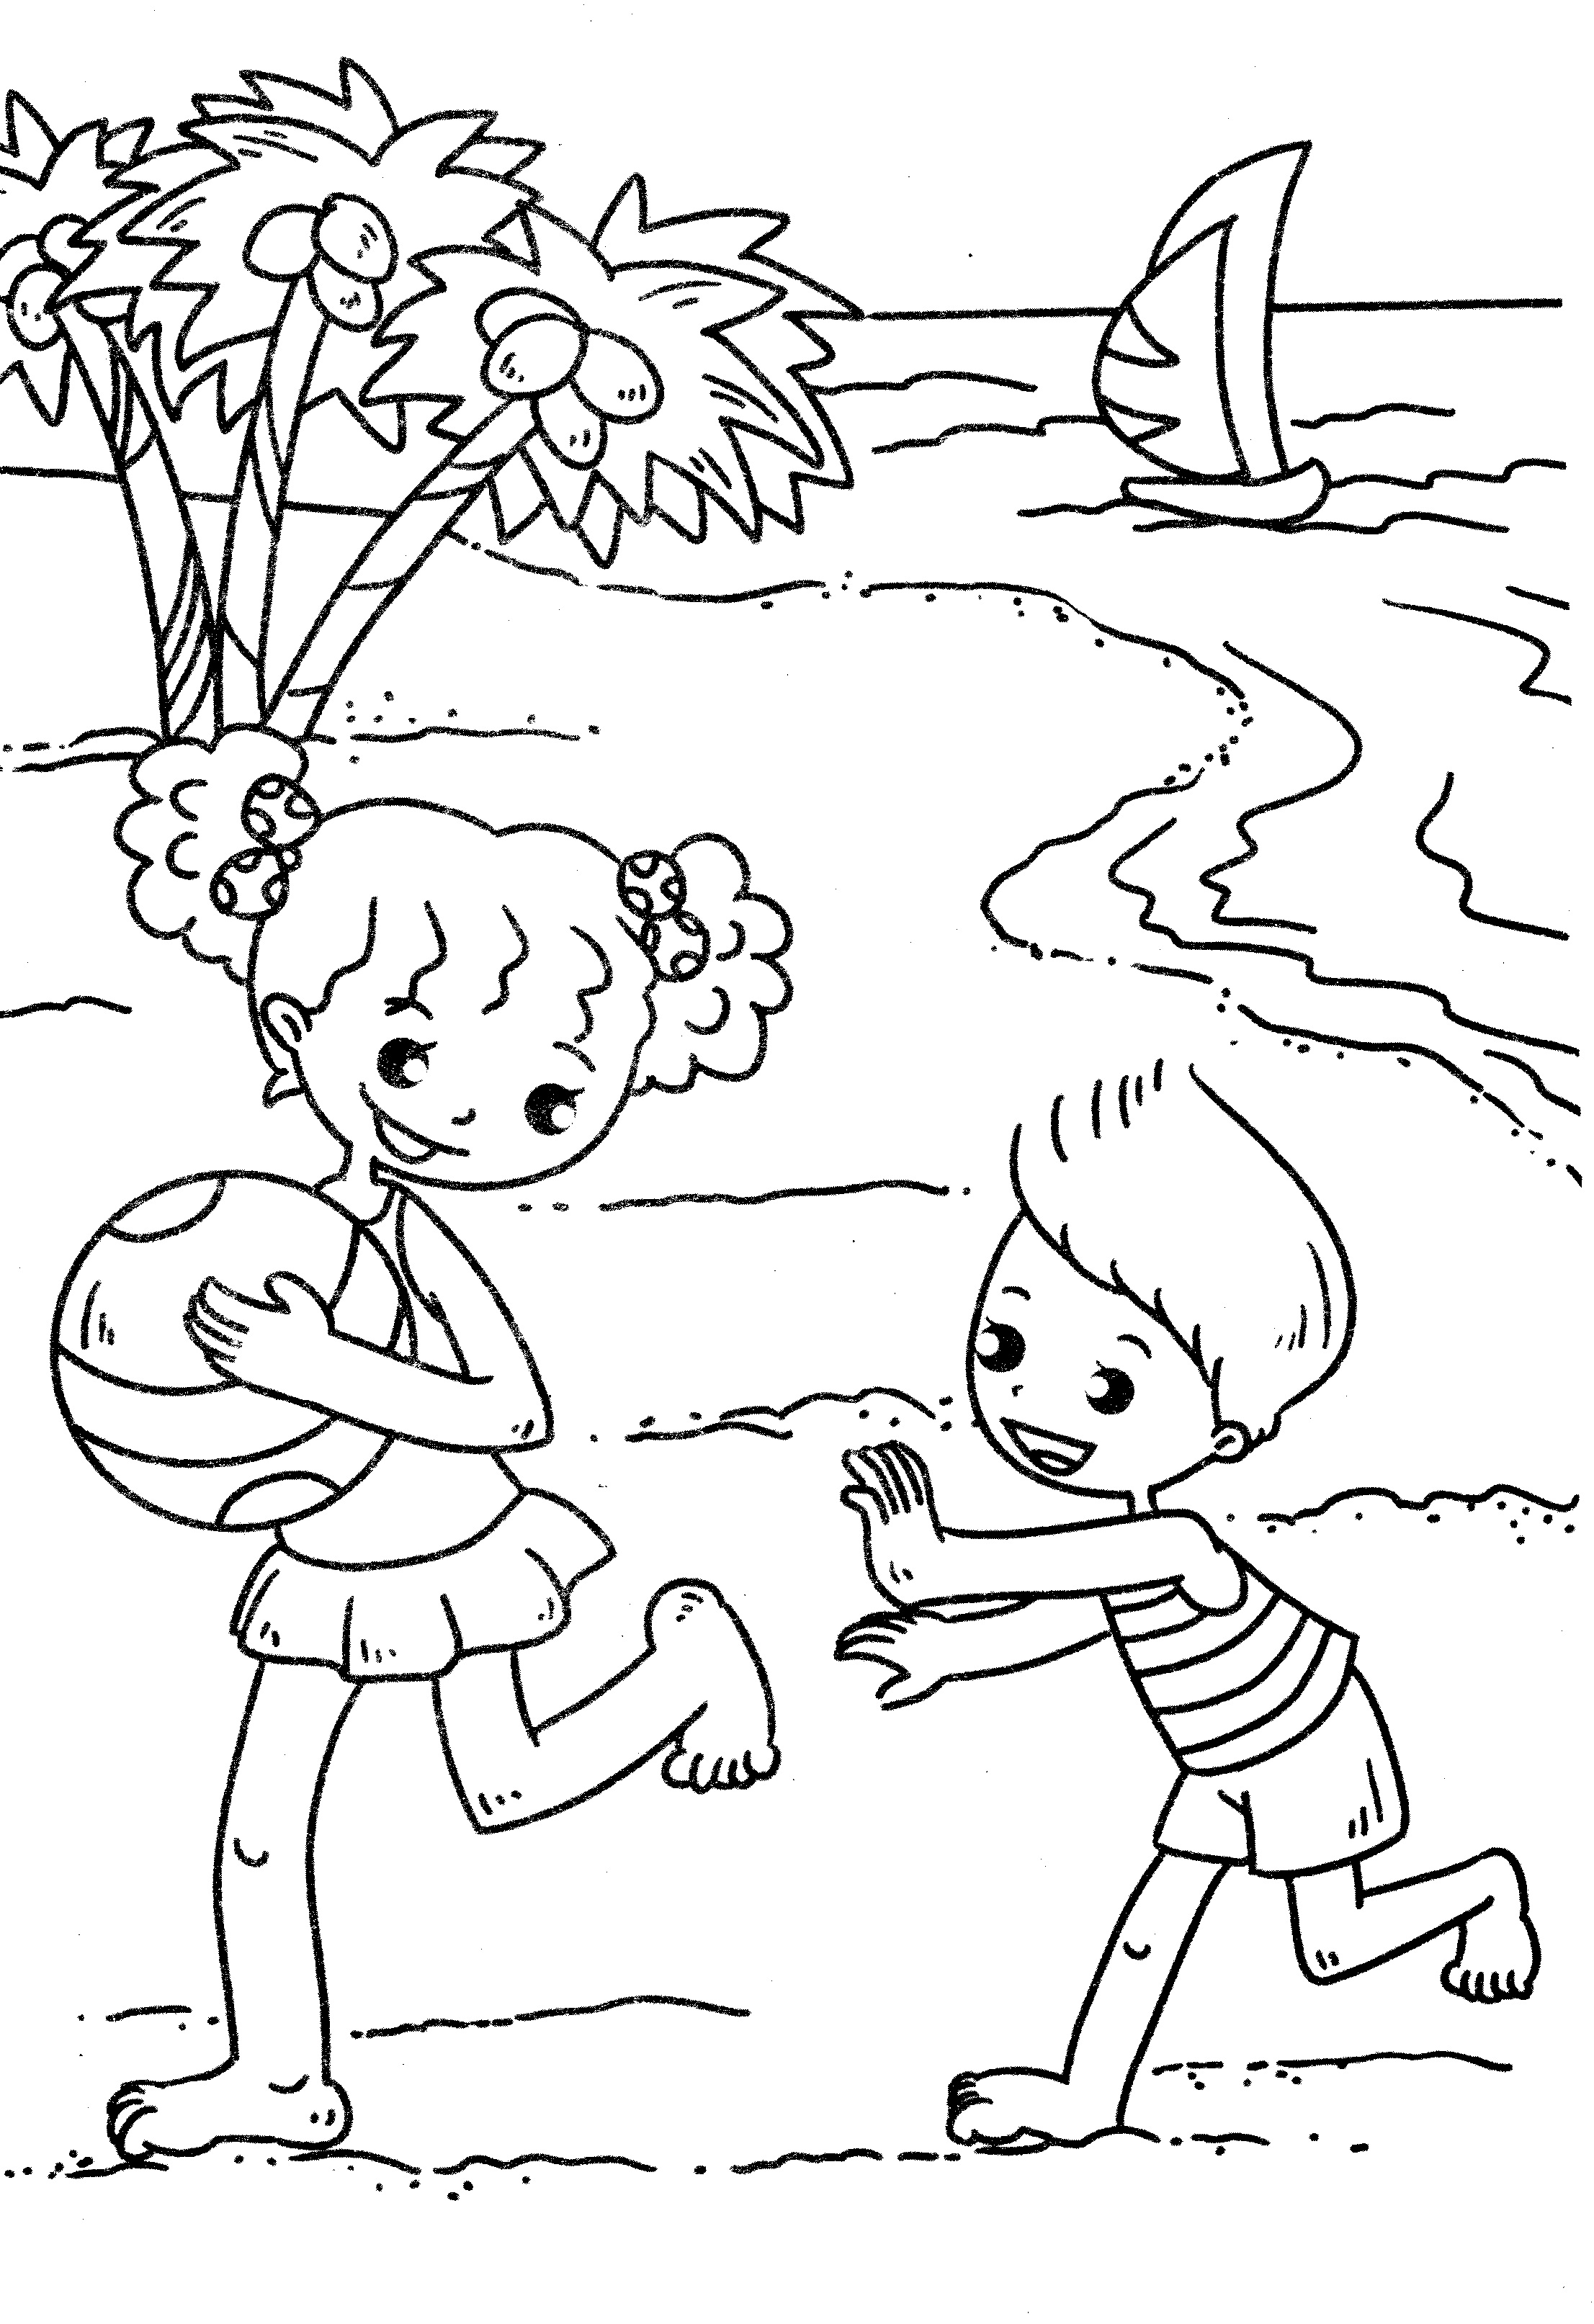 Coloring page: Beach (Nature) #159072 - Free Printable Coloring Pages